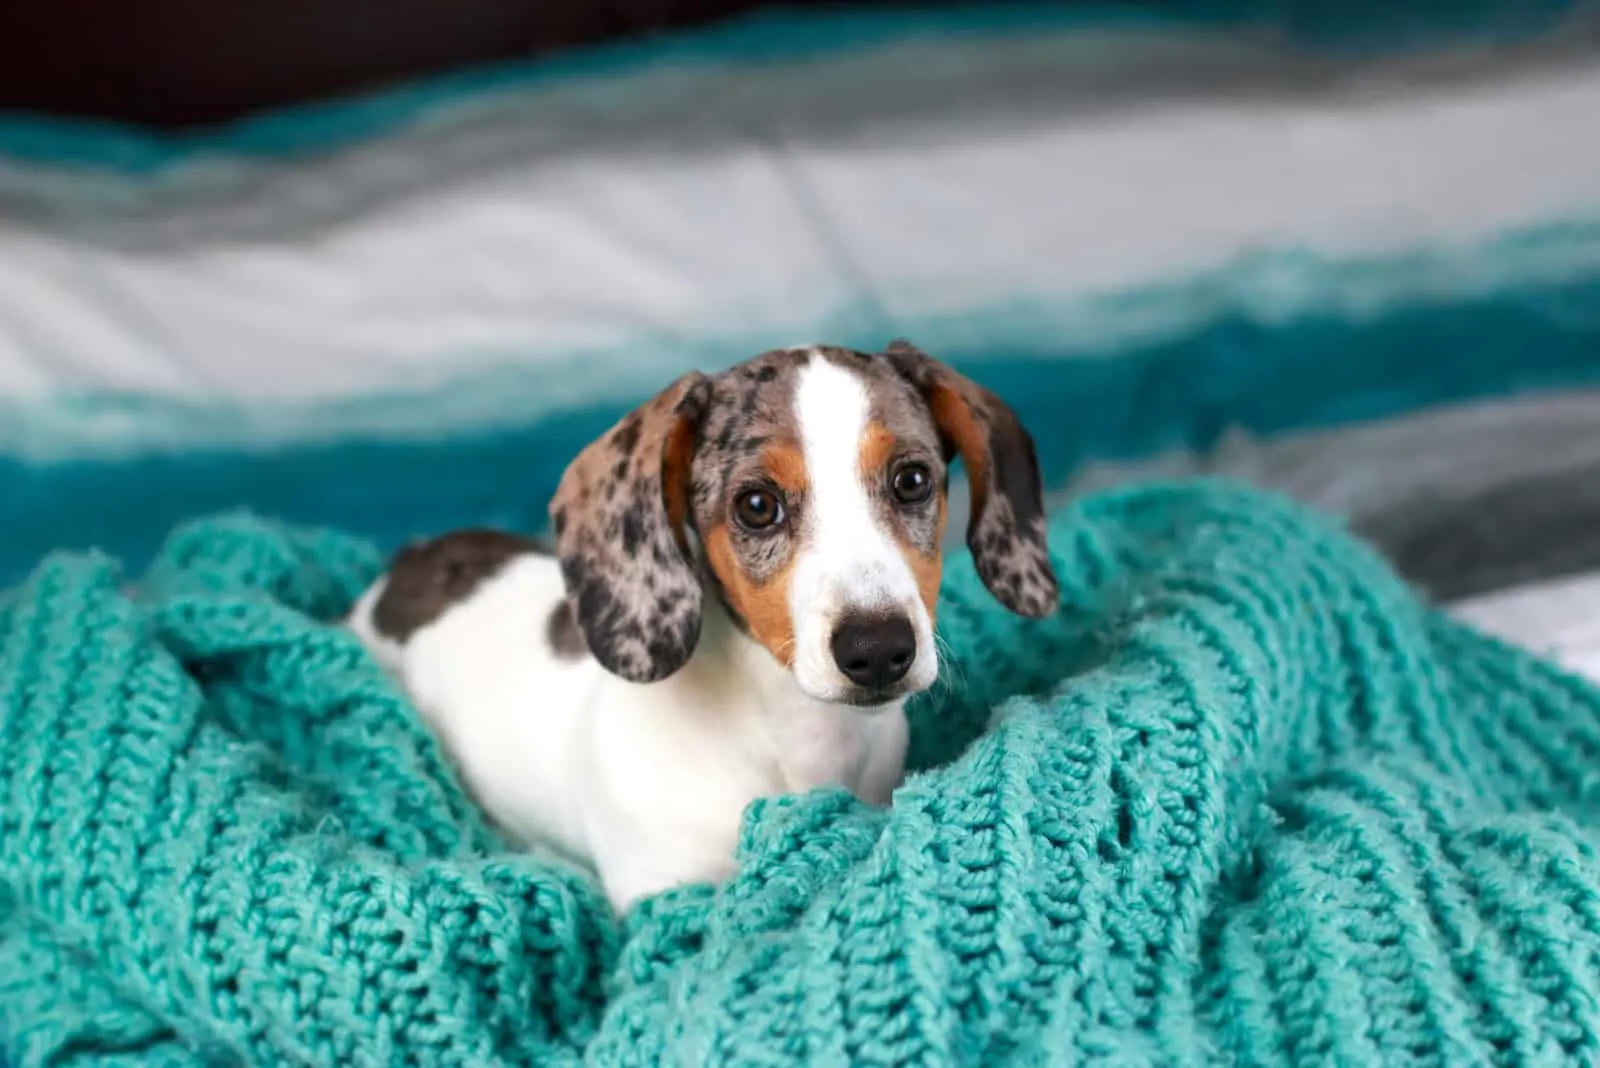 cute little dachshund puppy dog laying down on his blue cozy blanket looking up